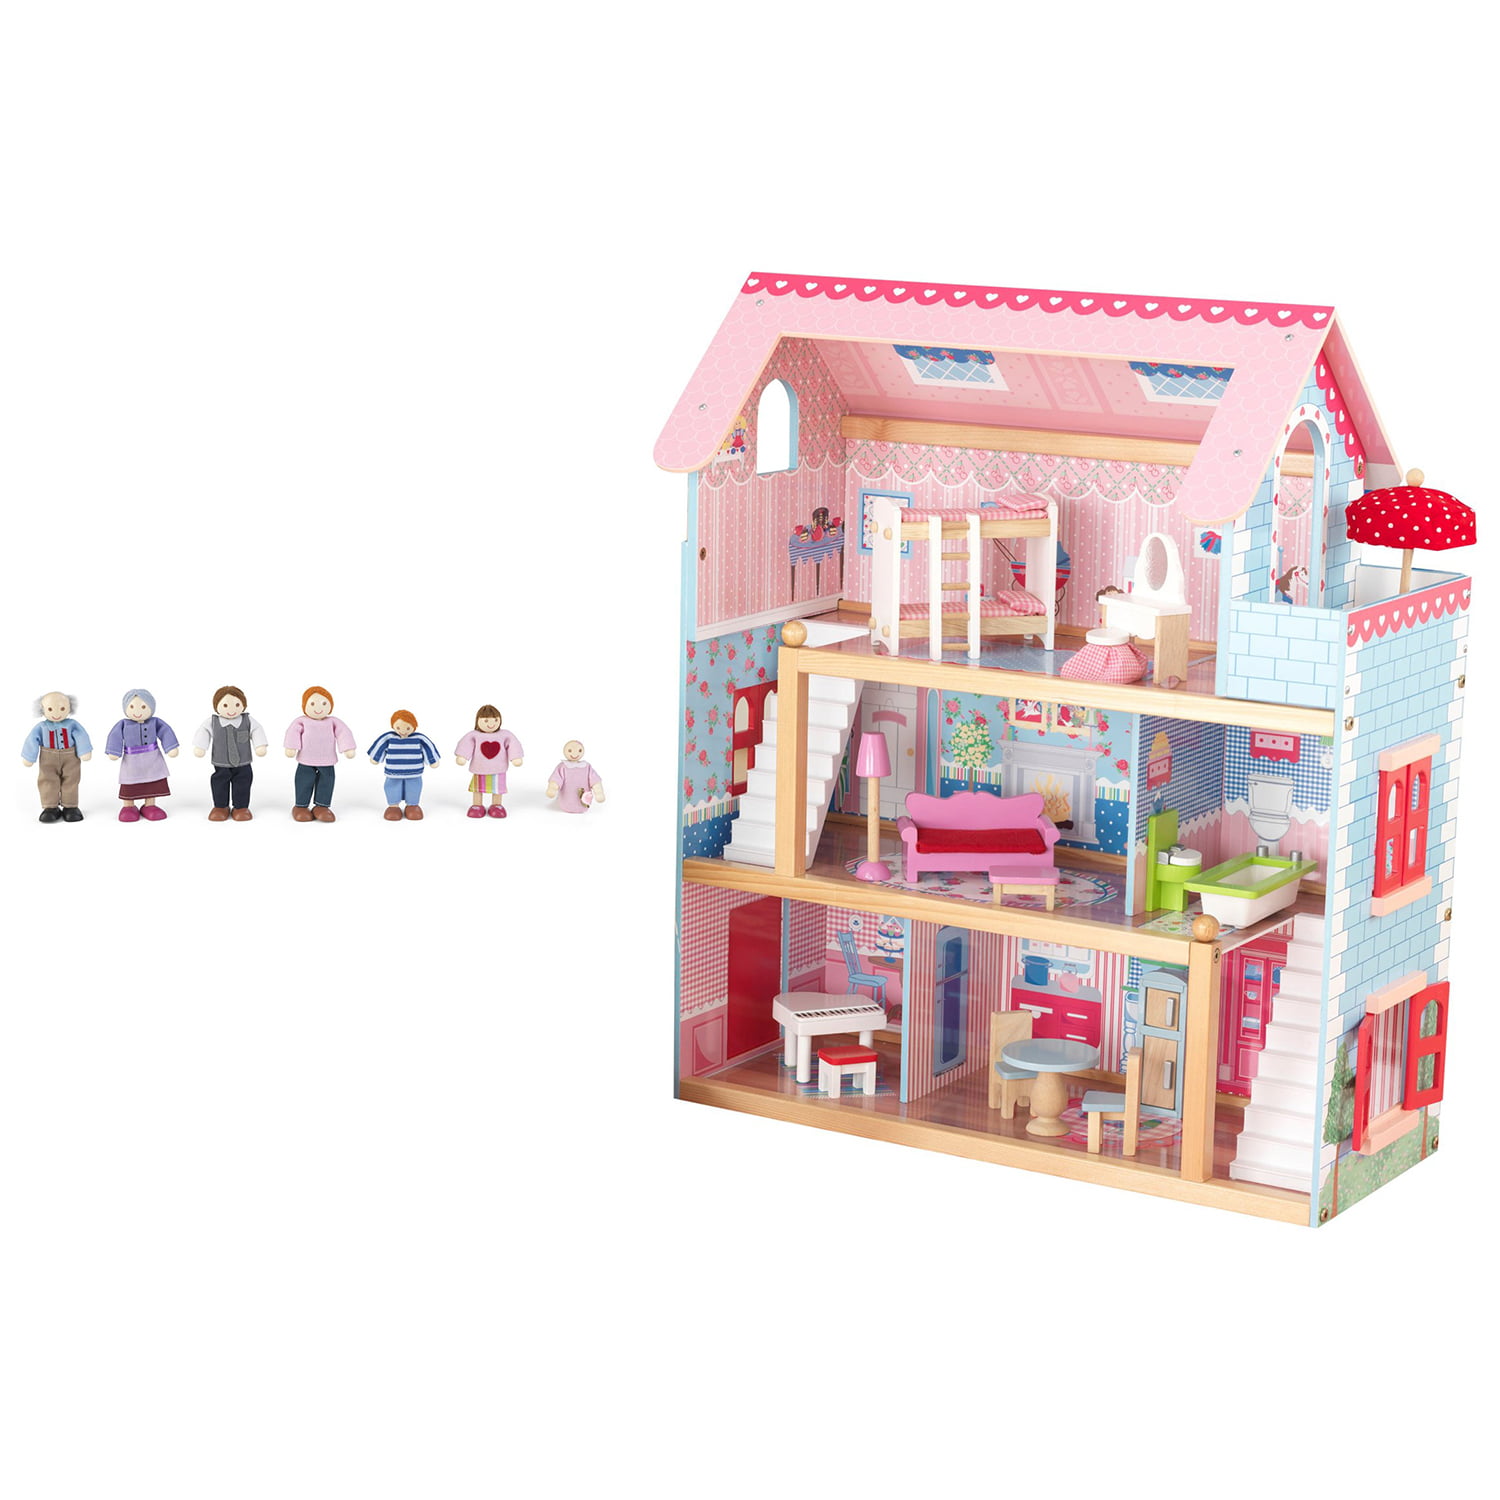 Kidkraft Chelsea Doll Cottage Wooden Dollhouse for small dolls figures 